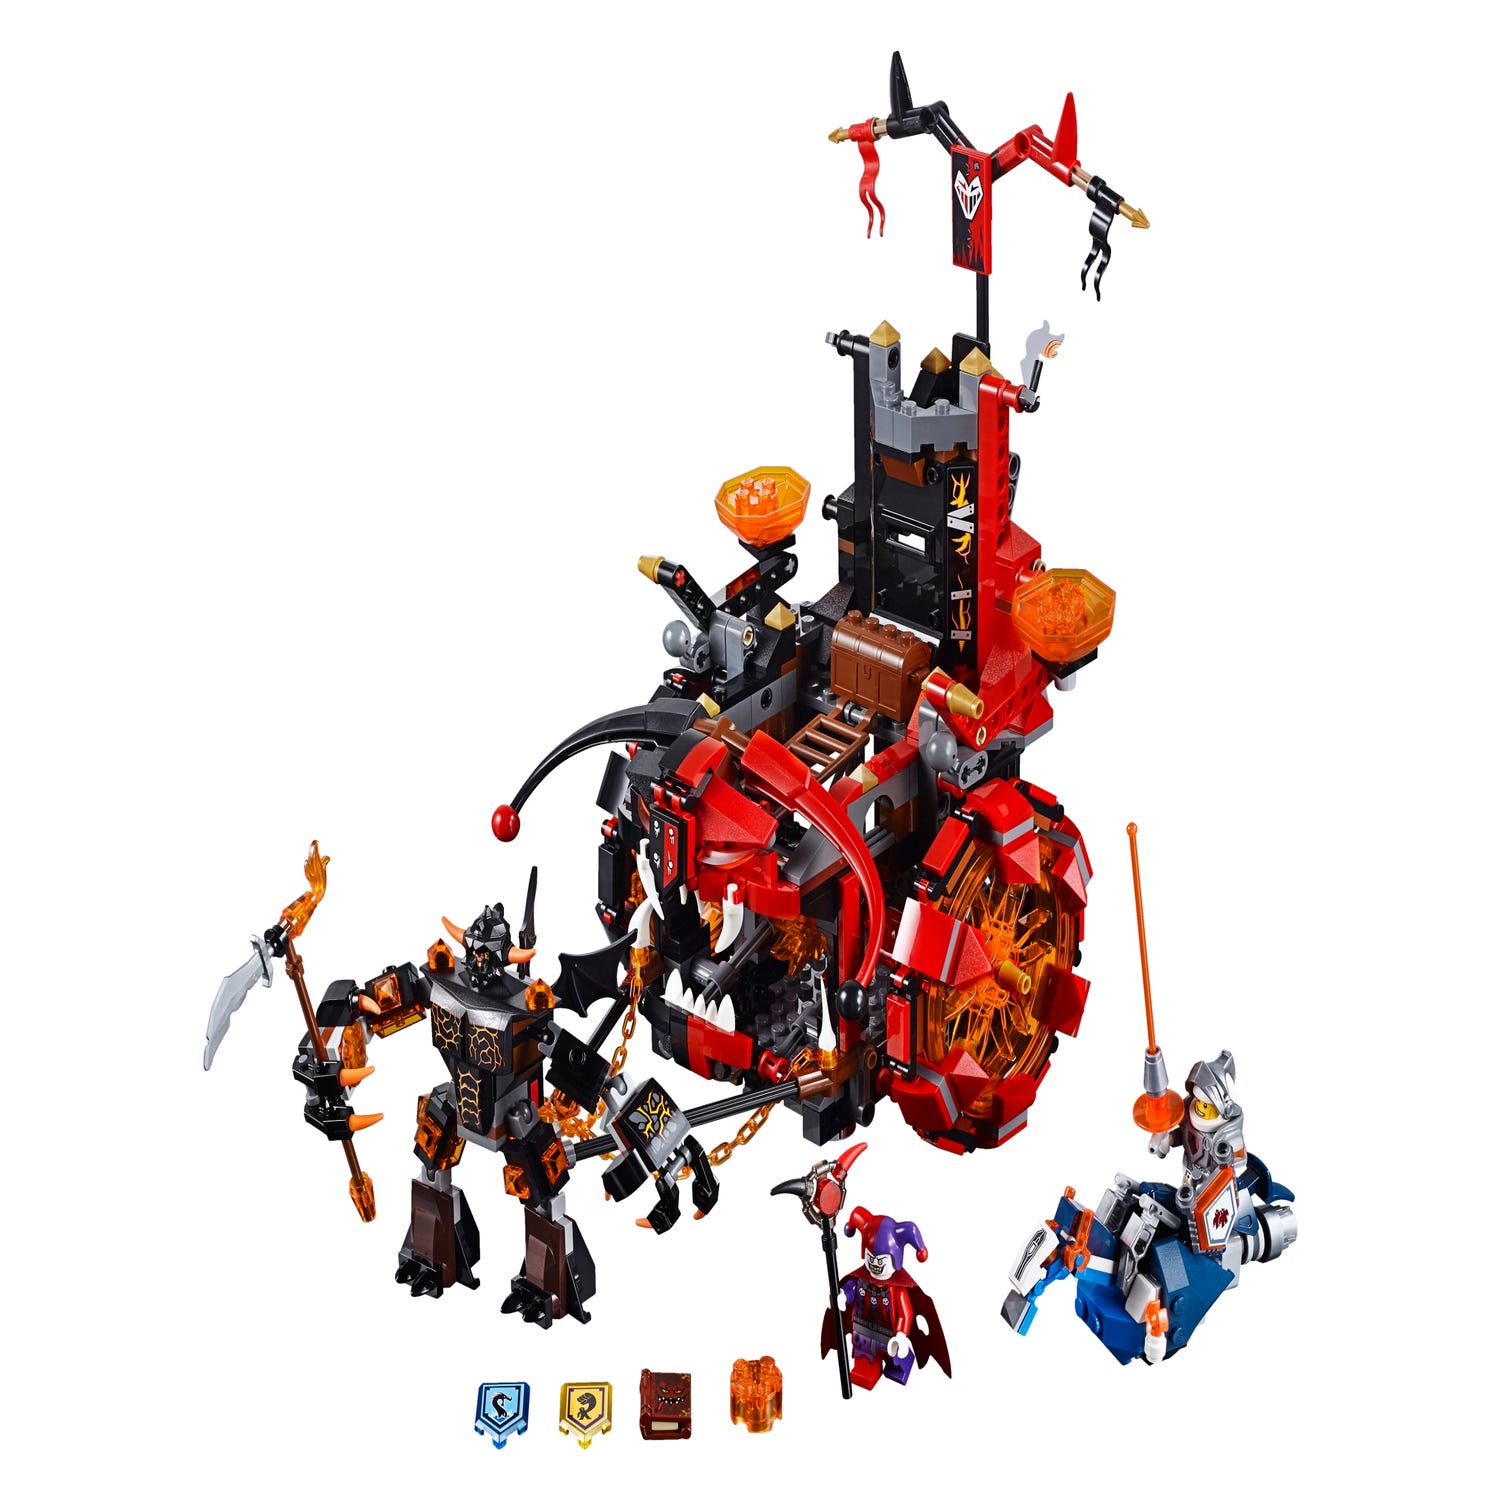 Jestro's Evil 70316 | NEXO KNIGHTS™ Buy online at the Official LEGO® Shop